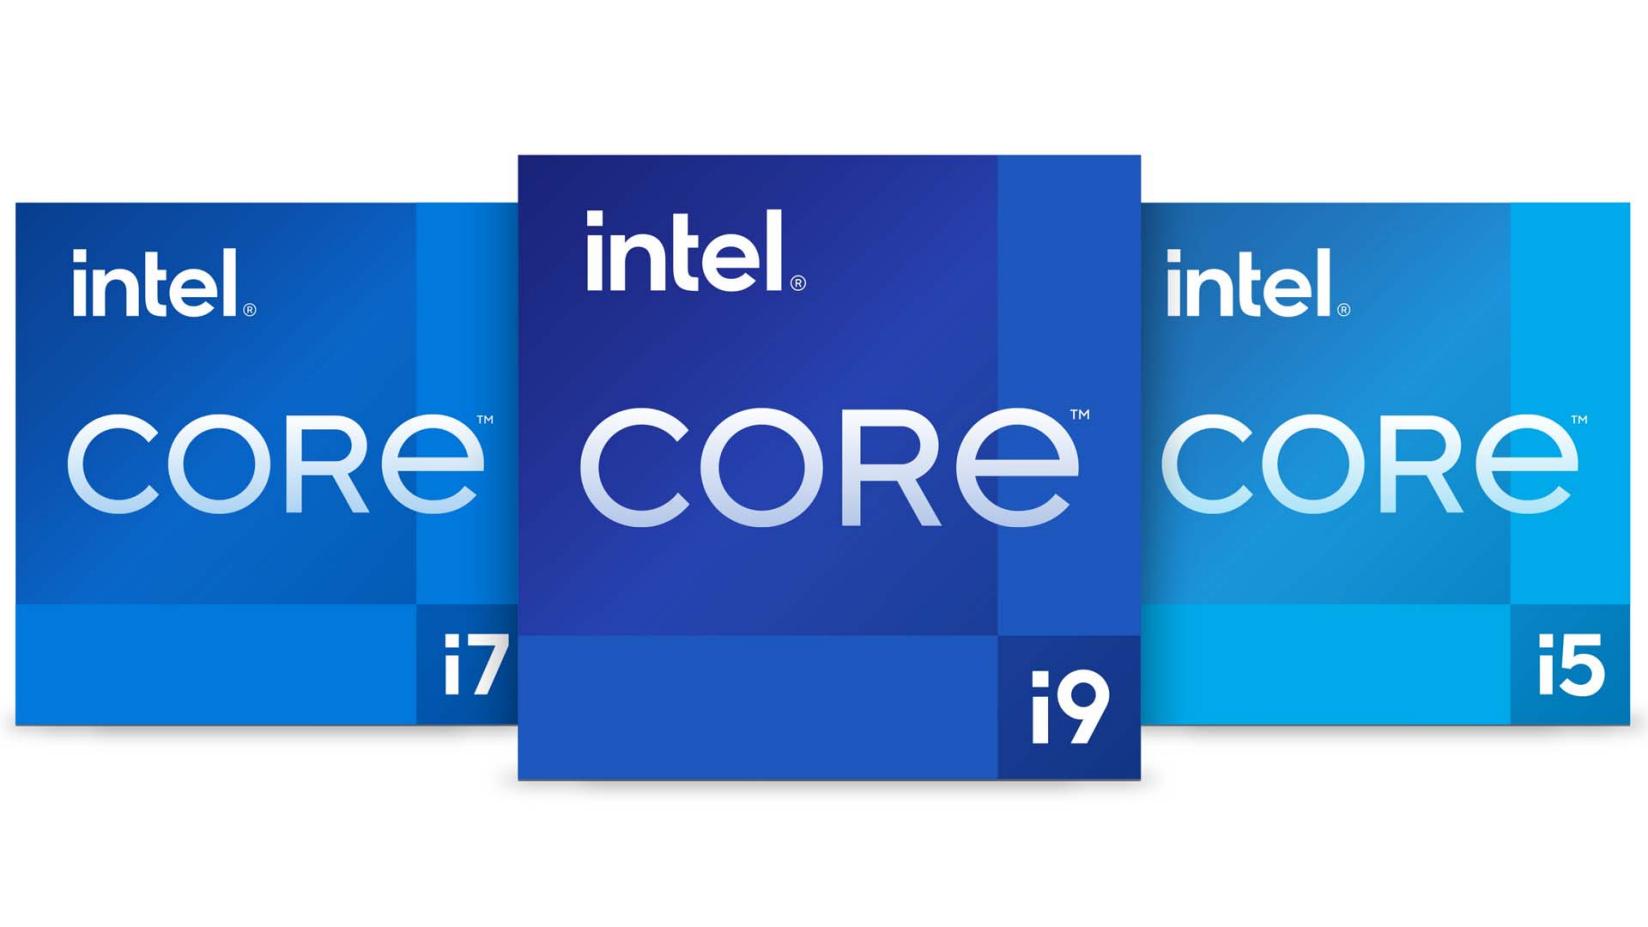 Intel Announced 12th Gen Core Alder Lake S Cpus With Ddr5 And Pcie Gen5 Support Cpu Rumors